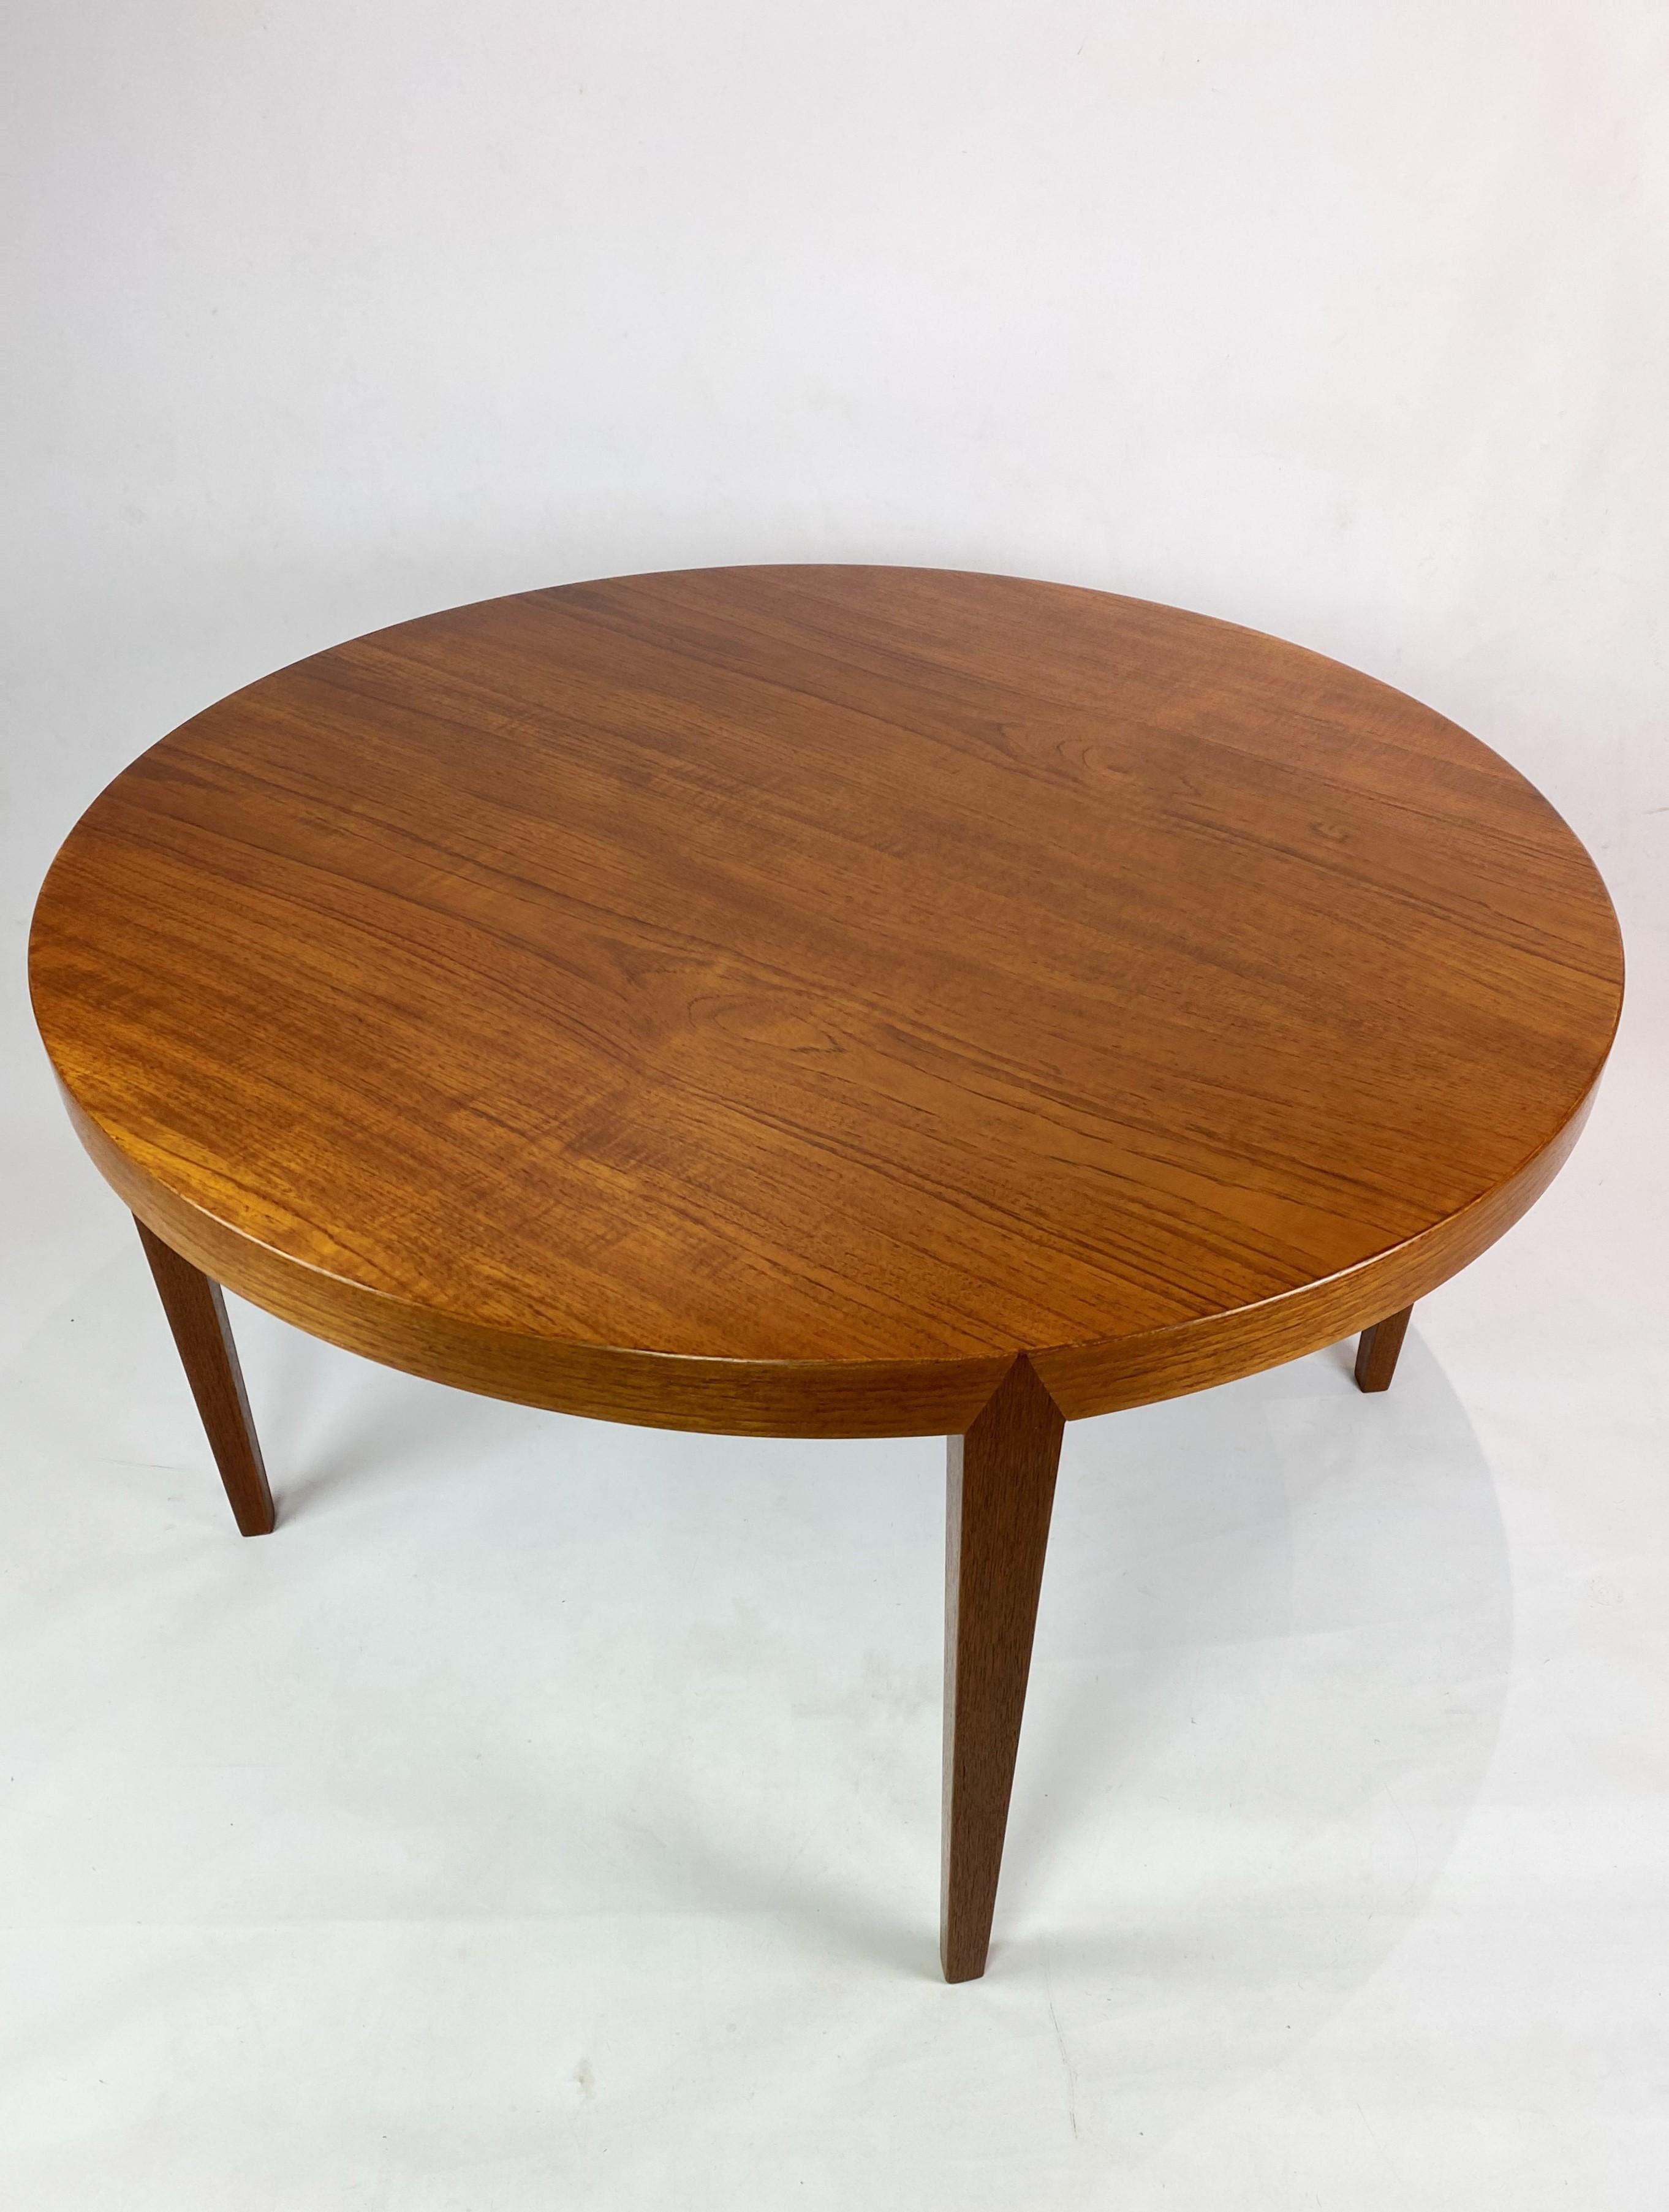 The coffee table, crafted from teak and designed by Severin Hansen, manufactured by Haslev Furniture in the 1960s, is a quintessential example of mid-century Danish design.

Fashioned from teak, a wood prized for its warm hues and durability, this